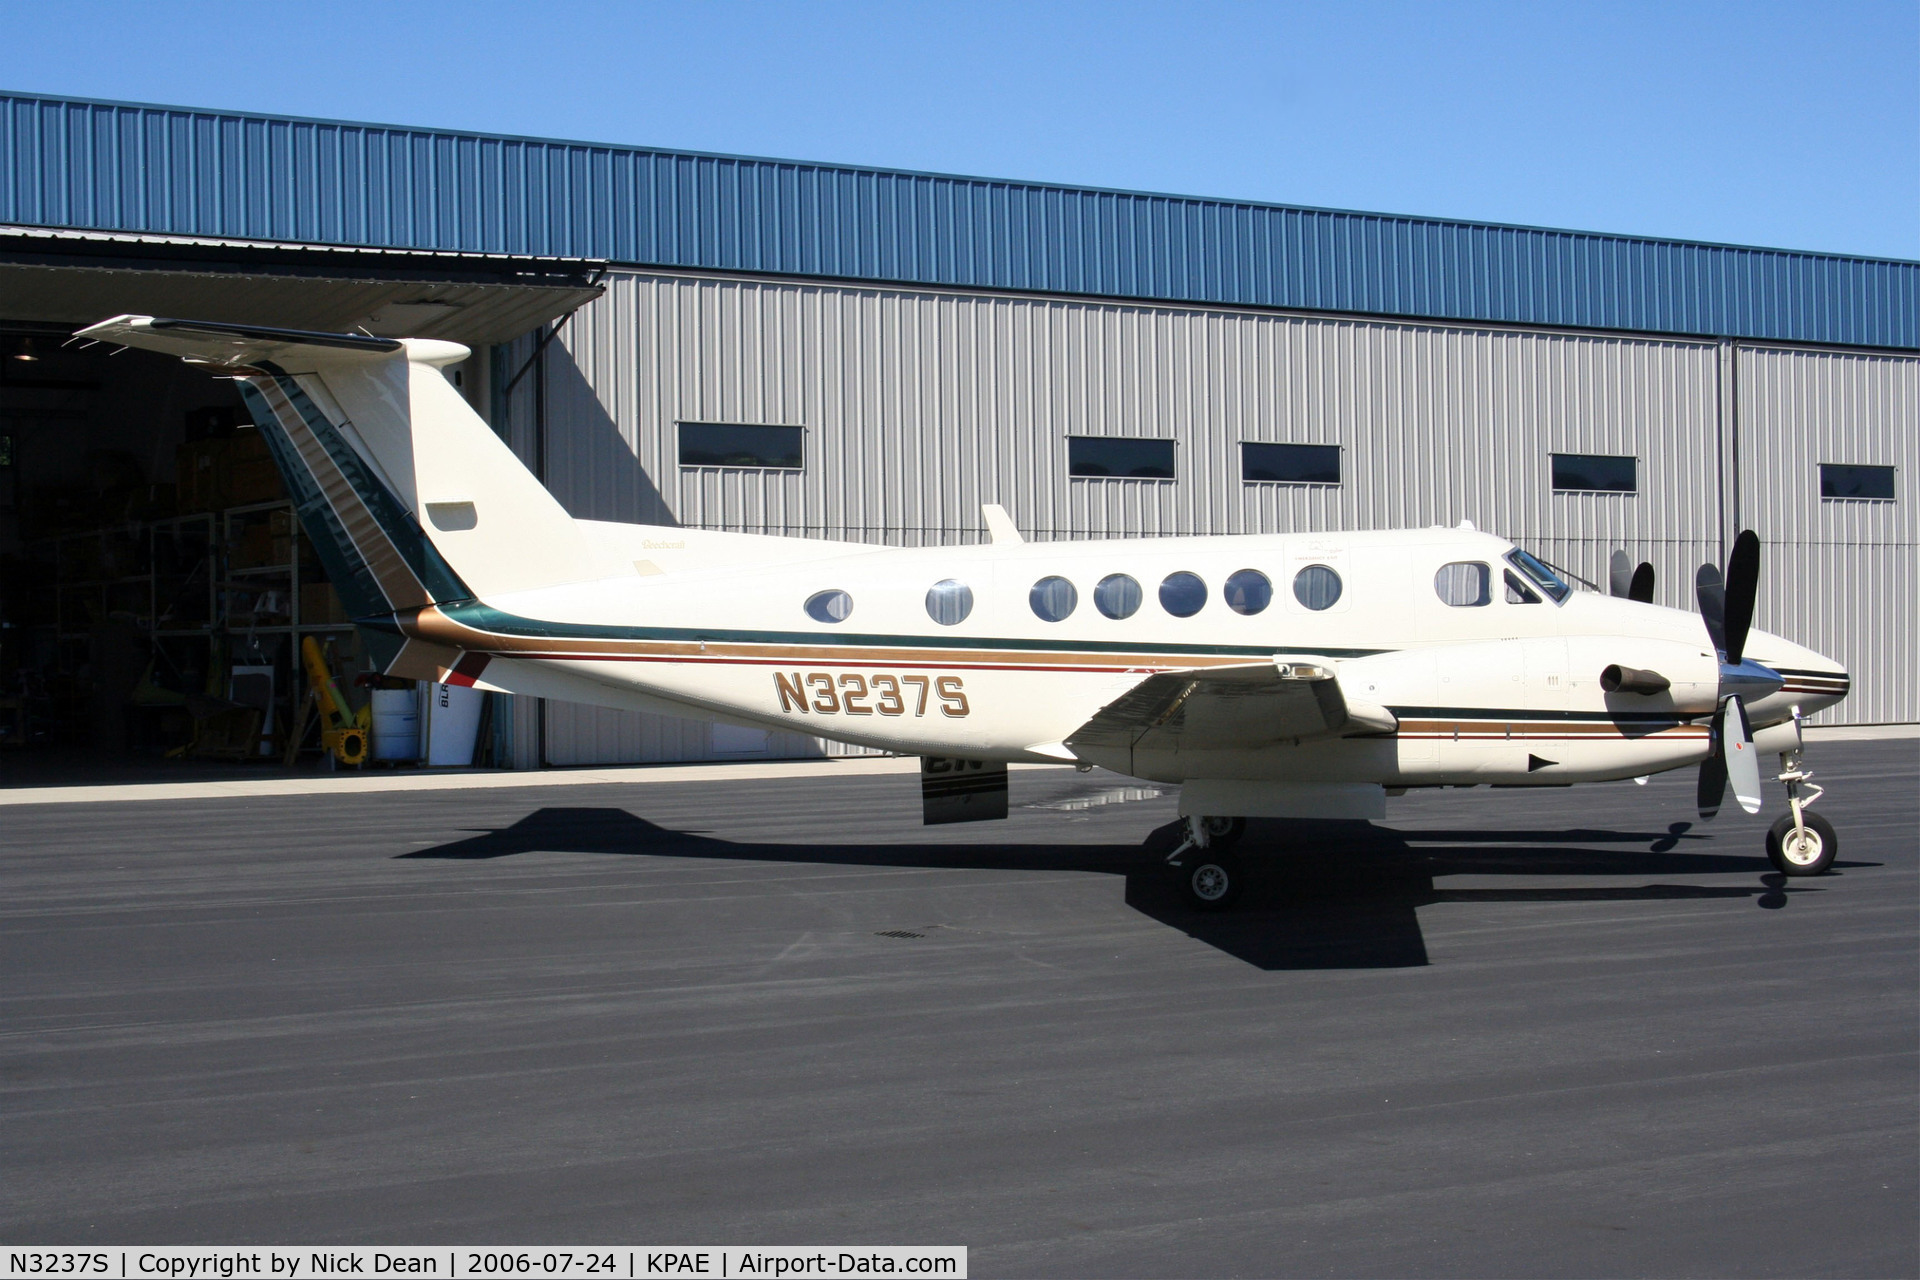 N3237S, 1988 Beech 300 C/N FA-163, KPAE (Prior to having the winglets installed)